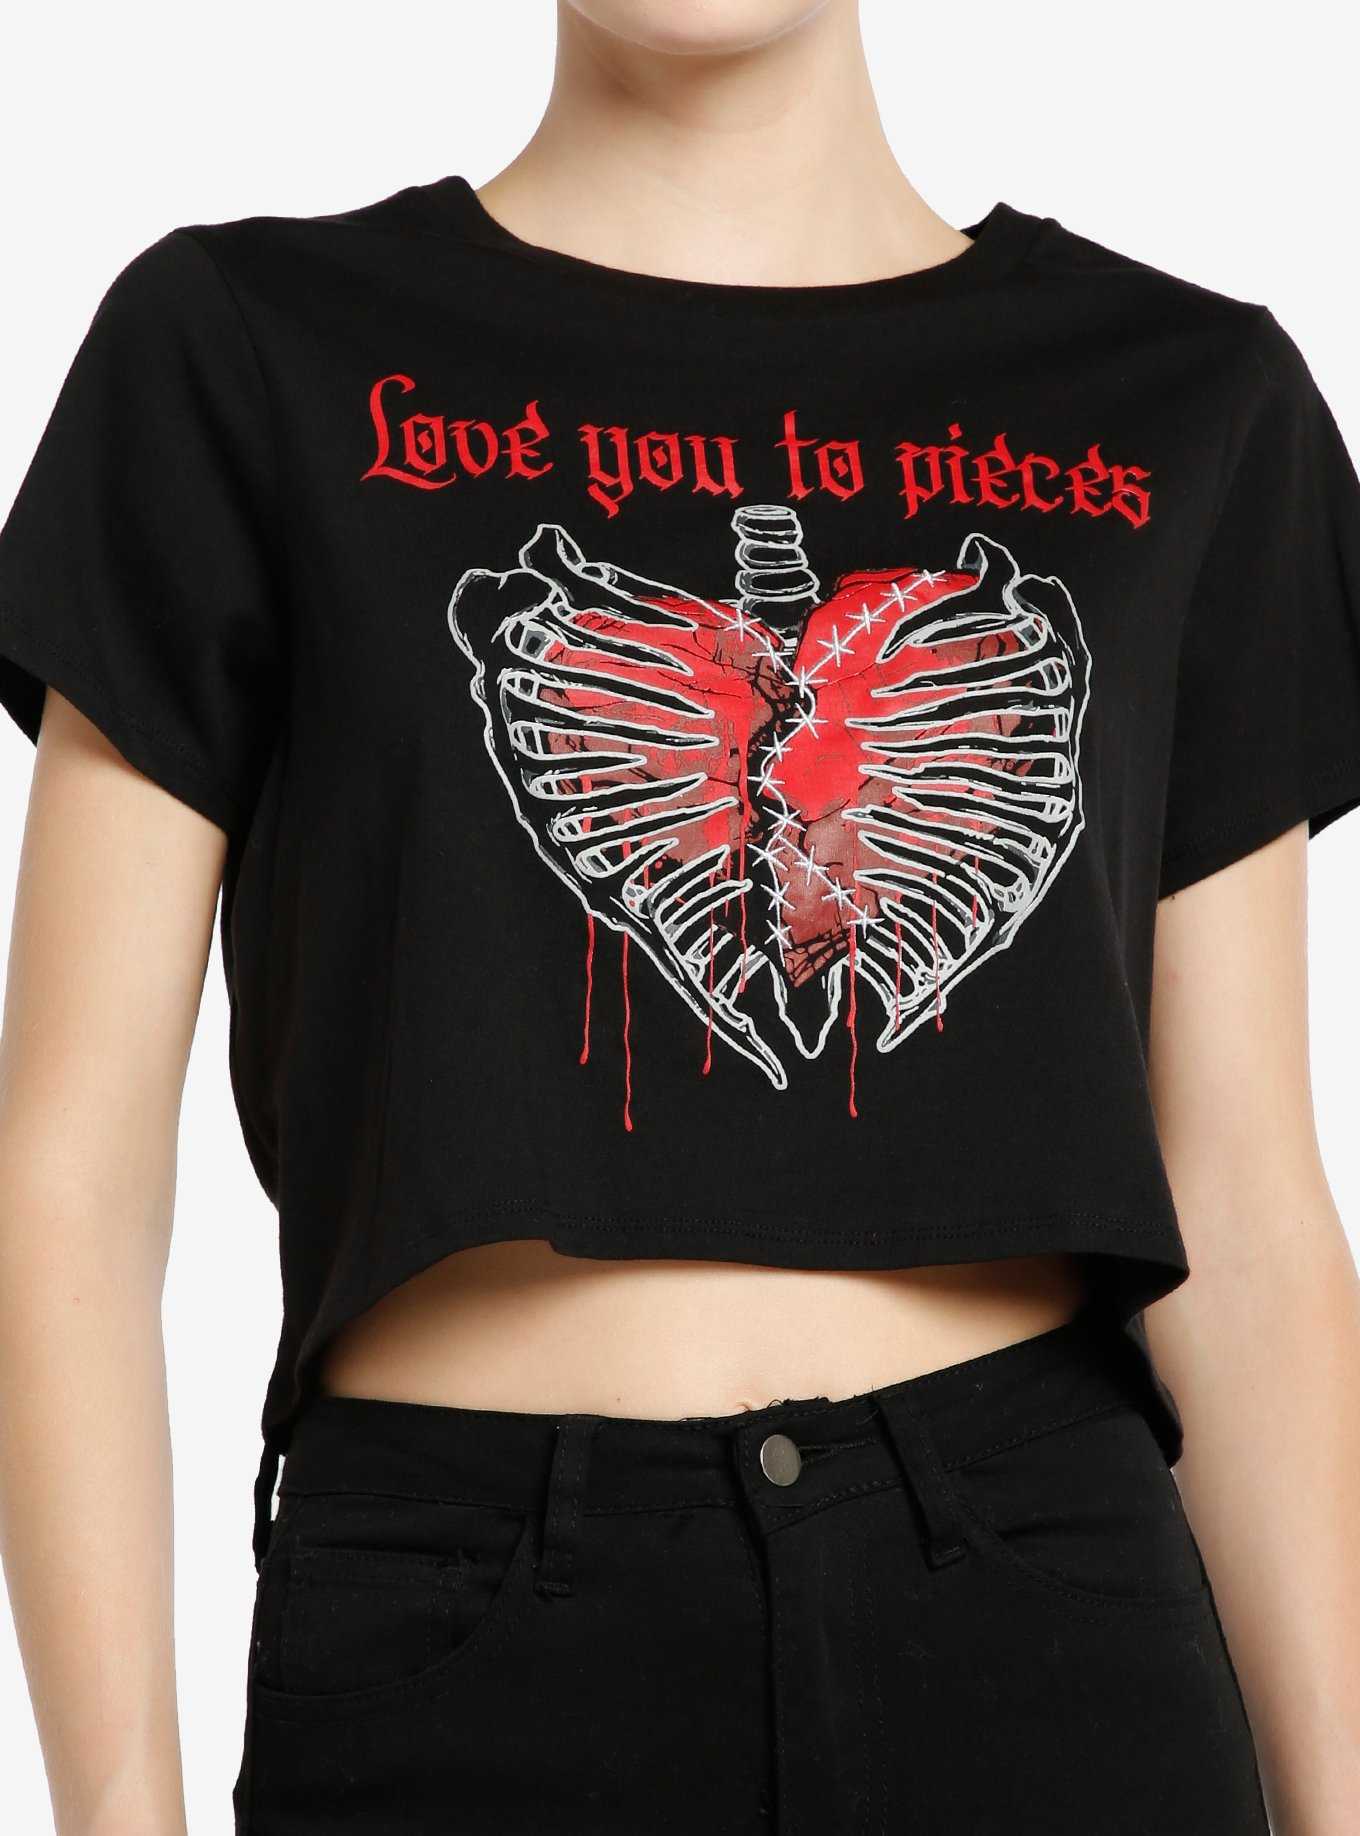 Don't Miss Out! T Shirts for Women Shirts for Women Cute Summer Tops for  Teen Girls Teen Girl Tops Teen Gifts for Girls Ages 14-16 Yellow Gifts  Black